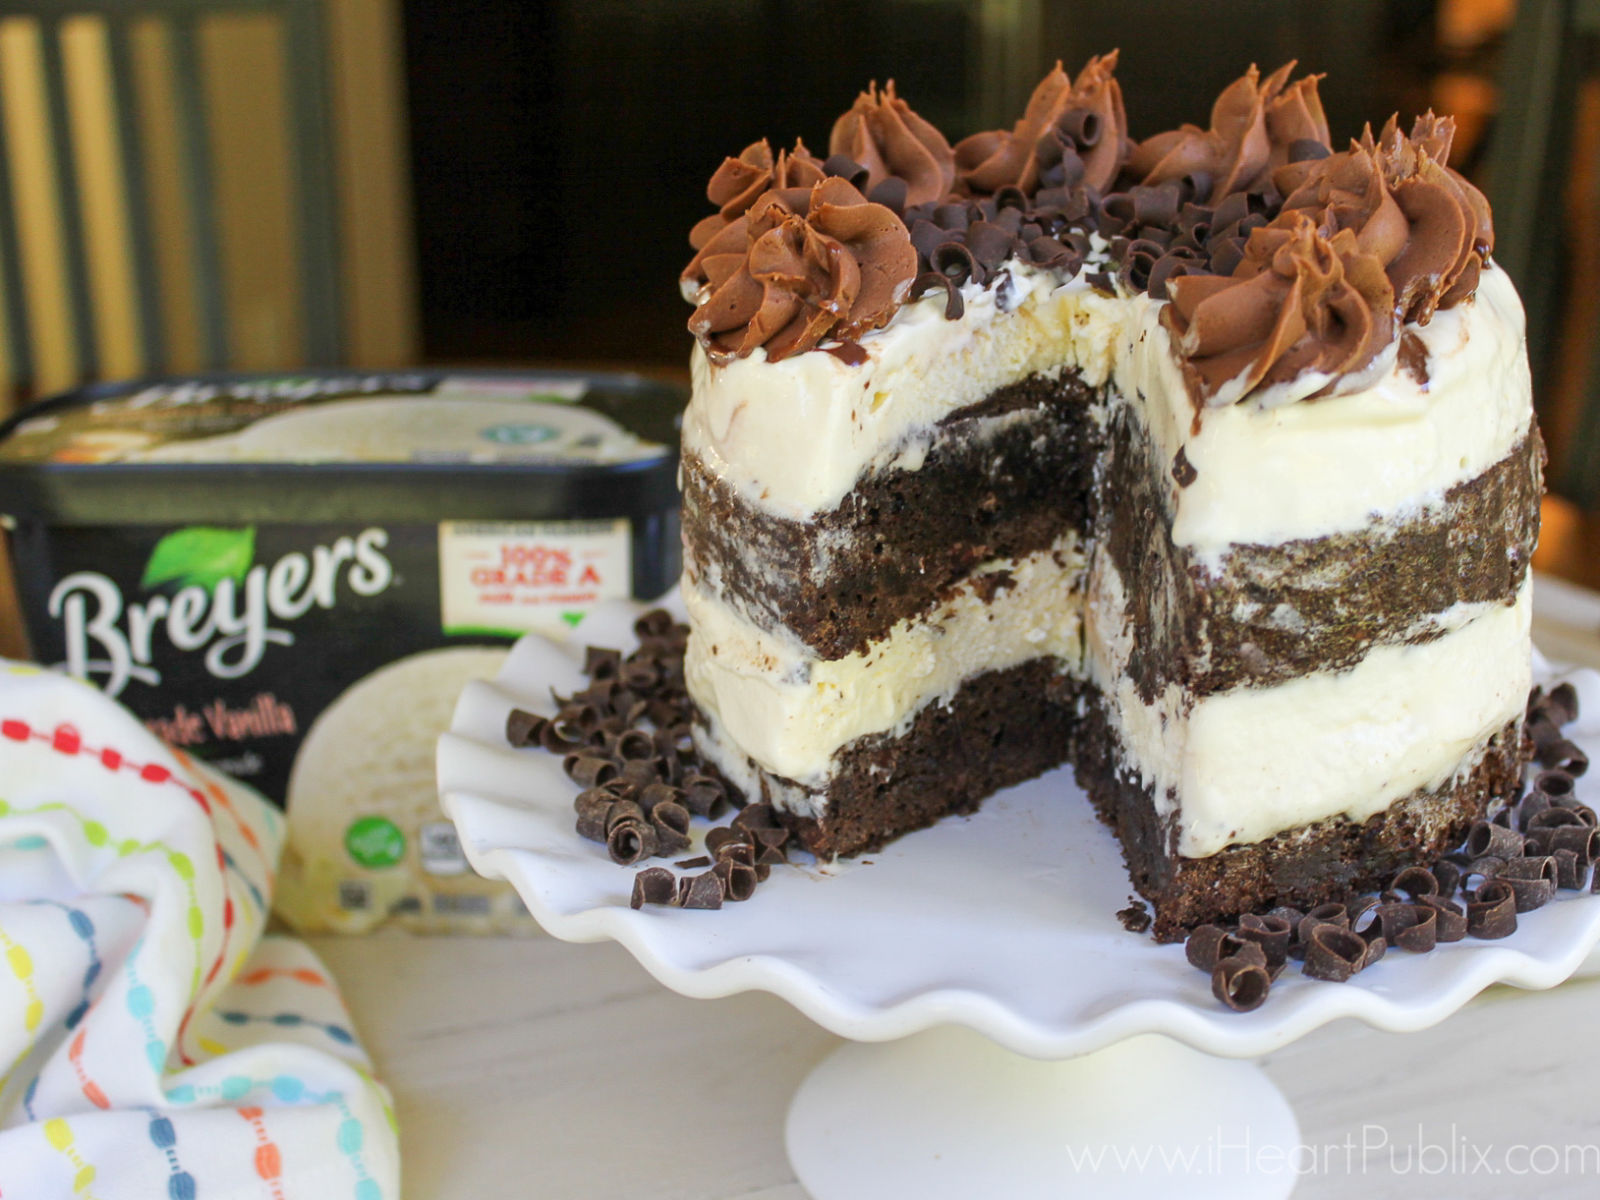 Serve Up A Brownie Ice Cream Cake At Your Next Gatherings – Save On Breyers Ice Cream Right Now At Publix